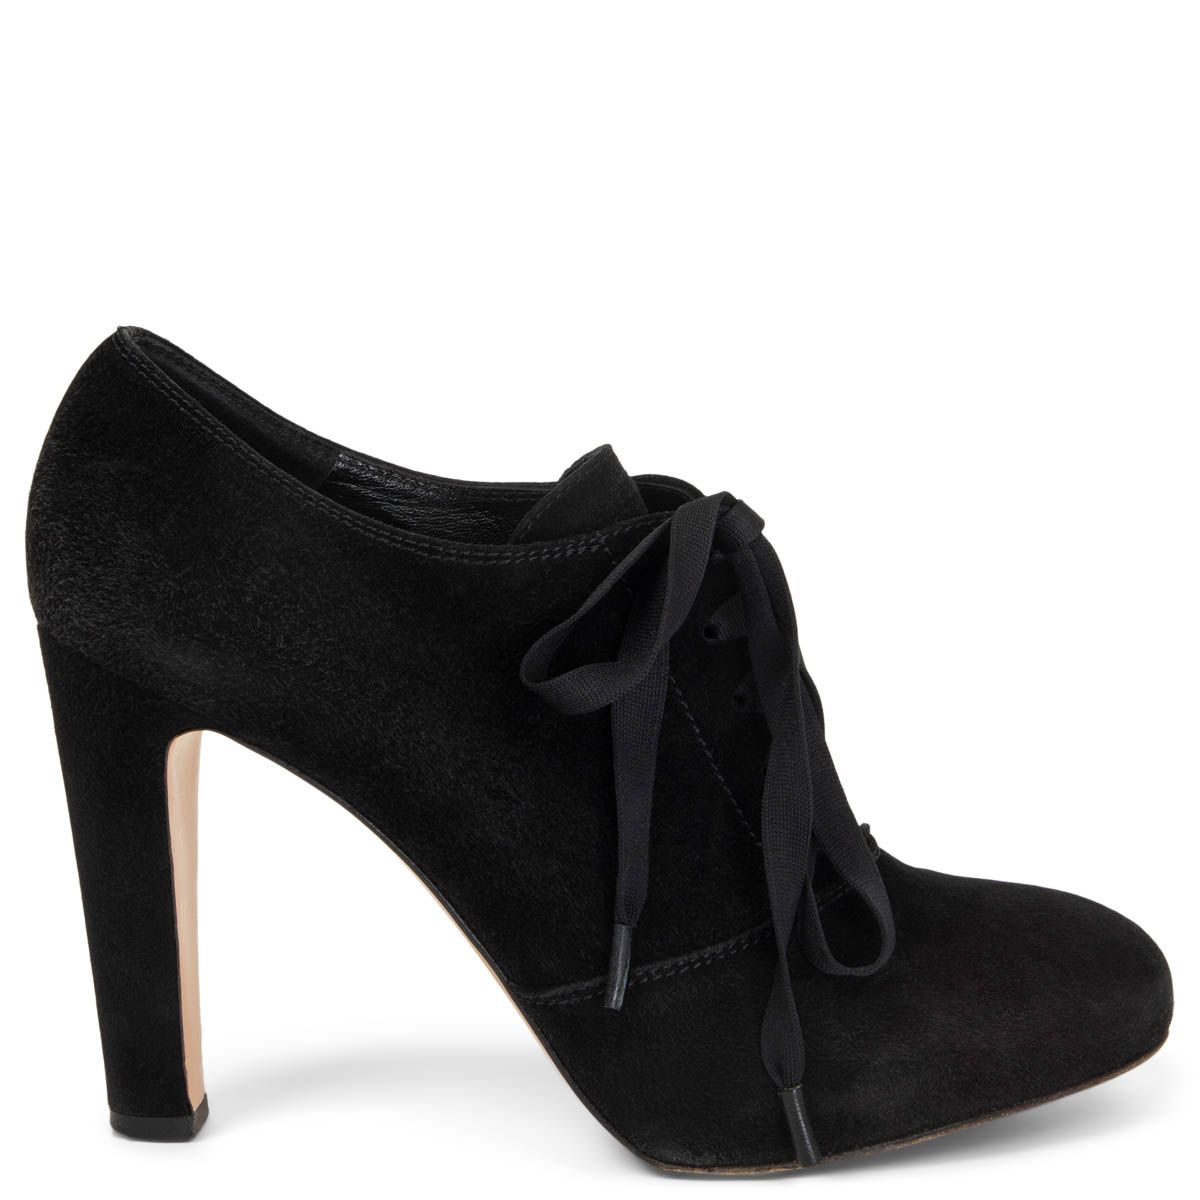 Symptoms Viva behind Gianvito Rossi Lace Up Ankle Boots Black Suede